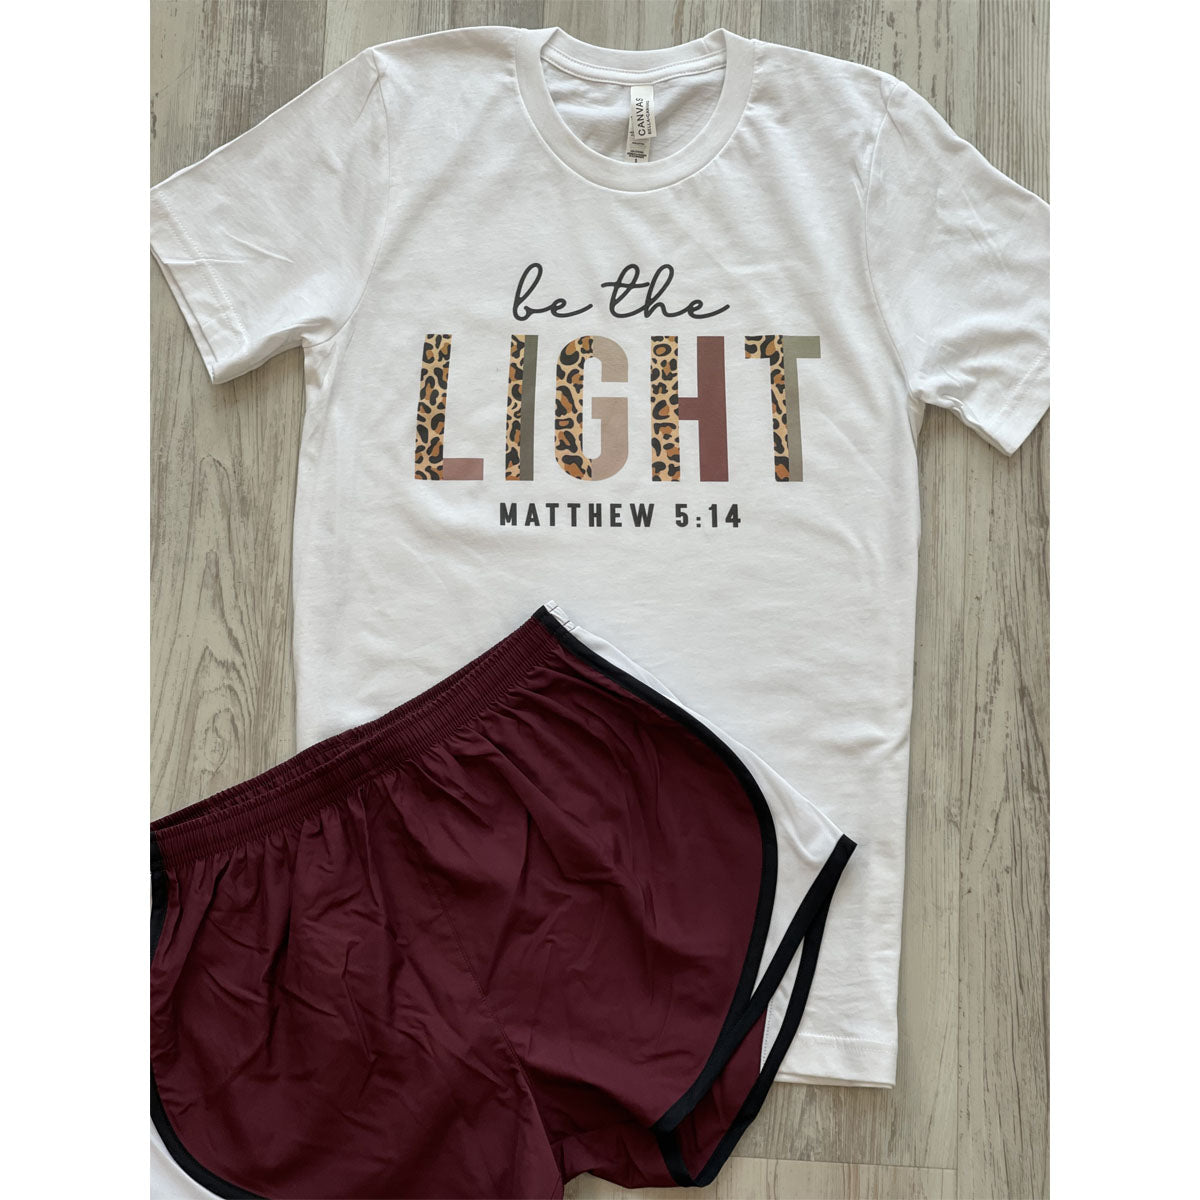 Be The Light Shorts Set (White Tee/Burgundy Shorts) - Southern Grace Creations